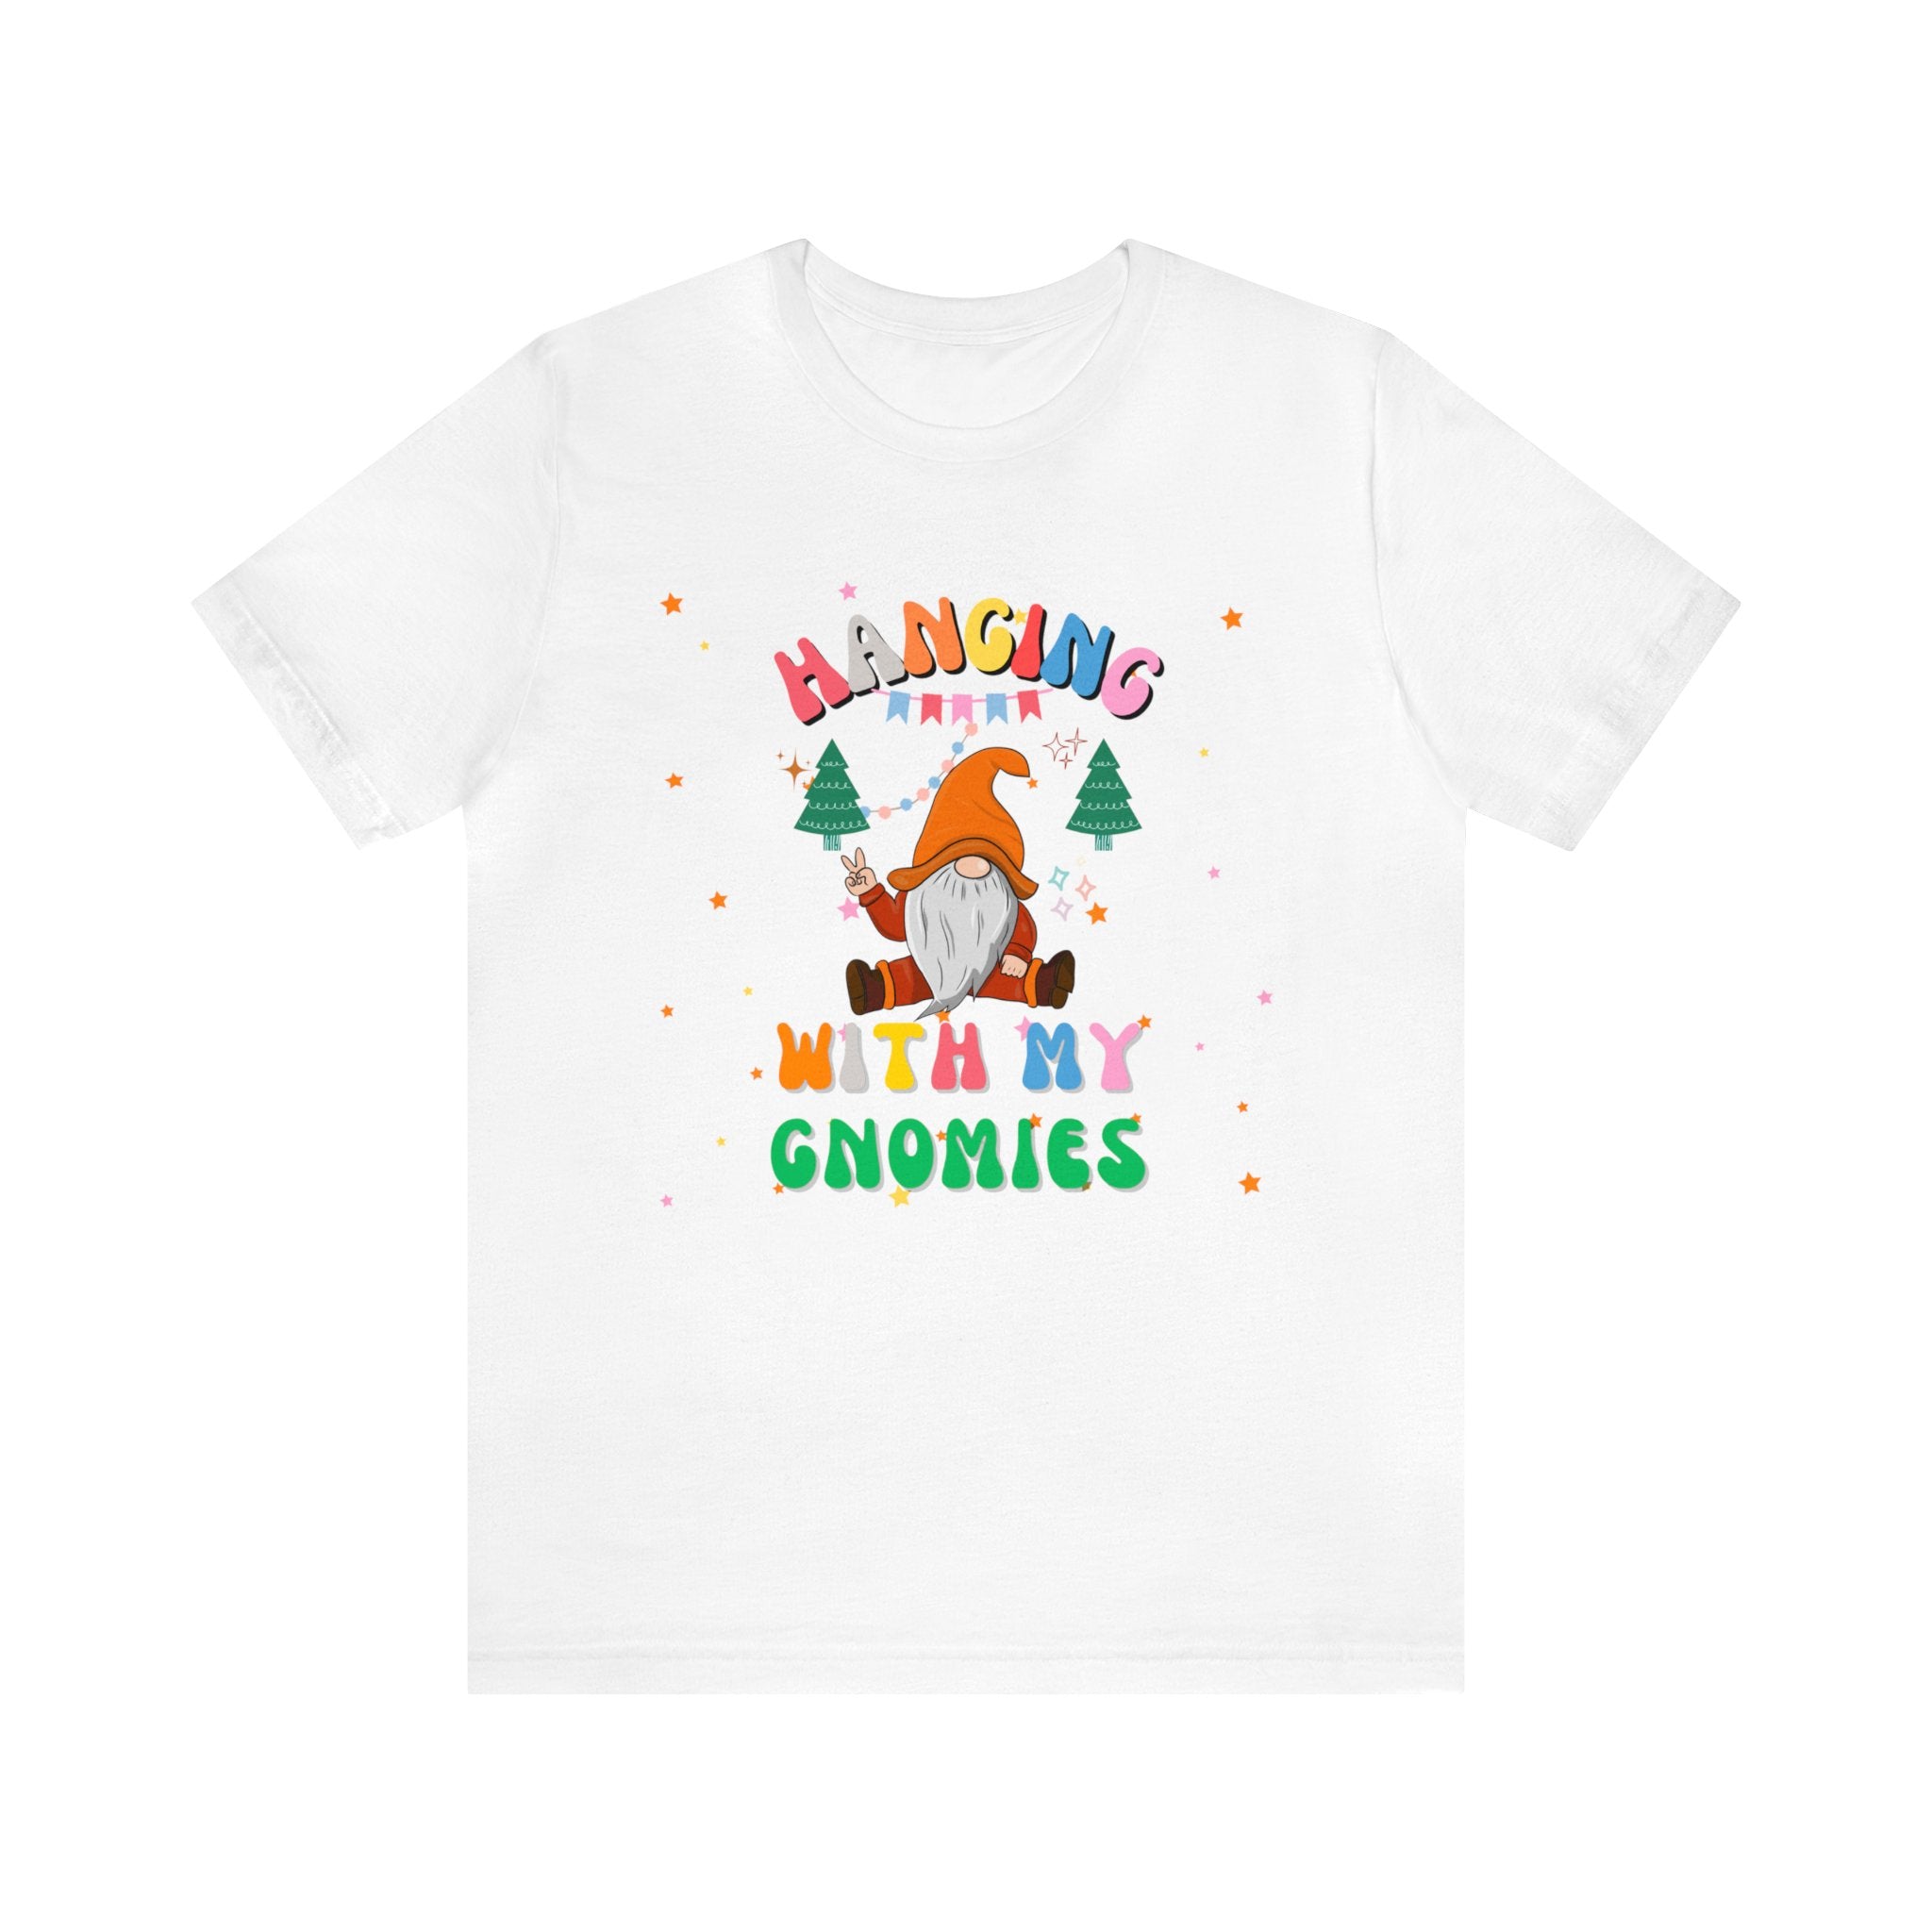 Hanging With My Gnomies - Christmas Edition : Unisex 100% Comfy Cotton, T-Shirt by Bella+Canvas